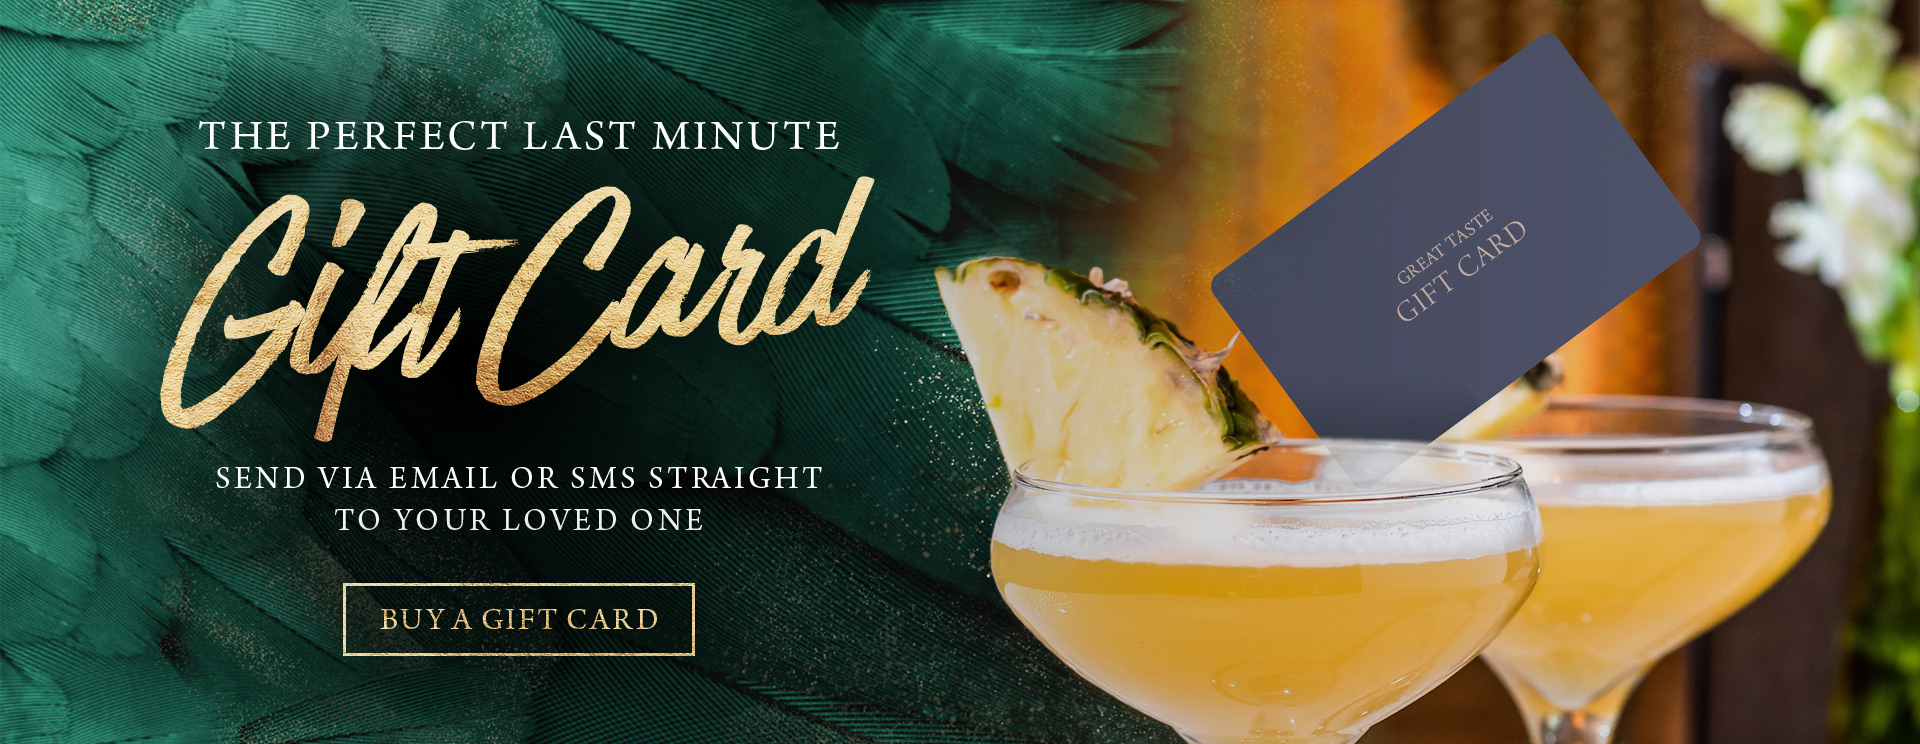 Give the gift of a gift card at The White Hart